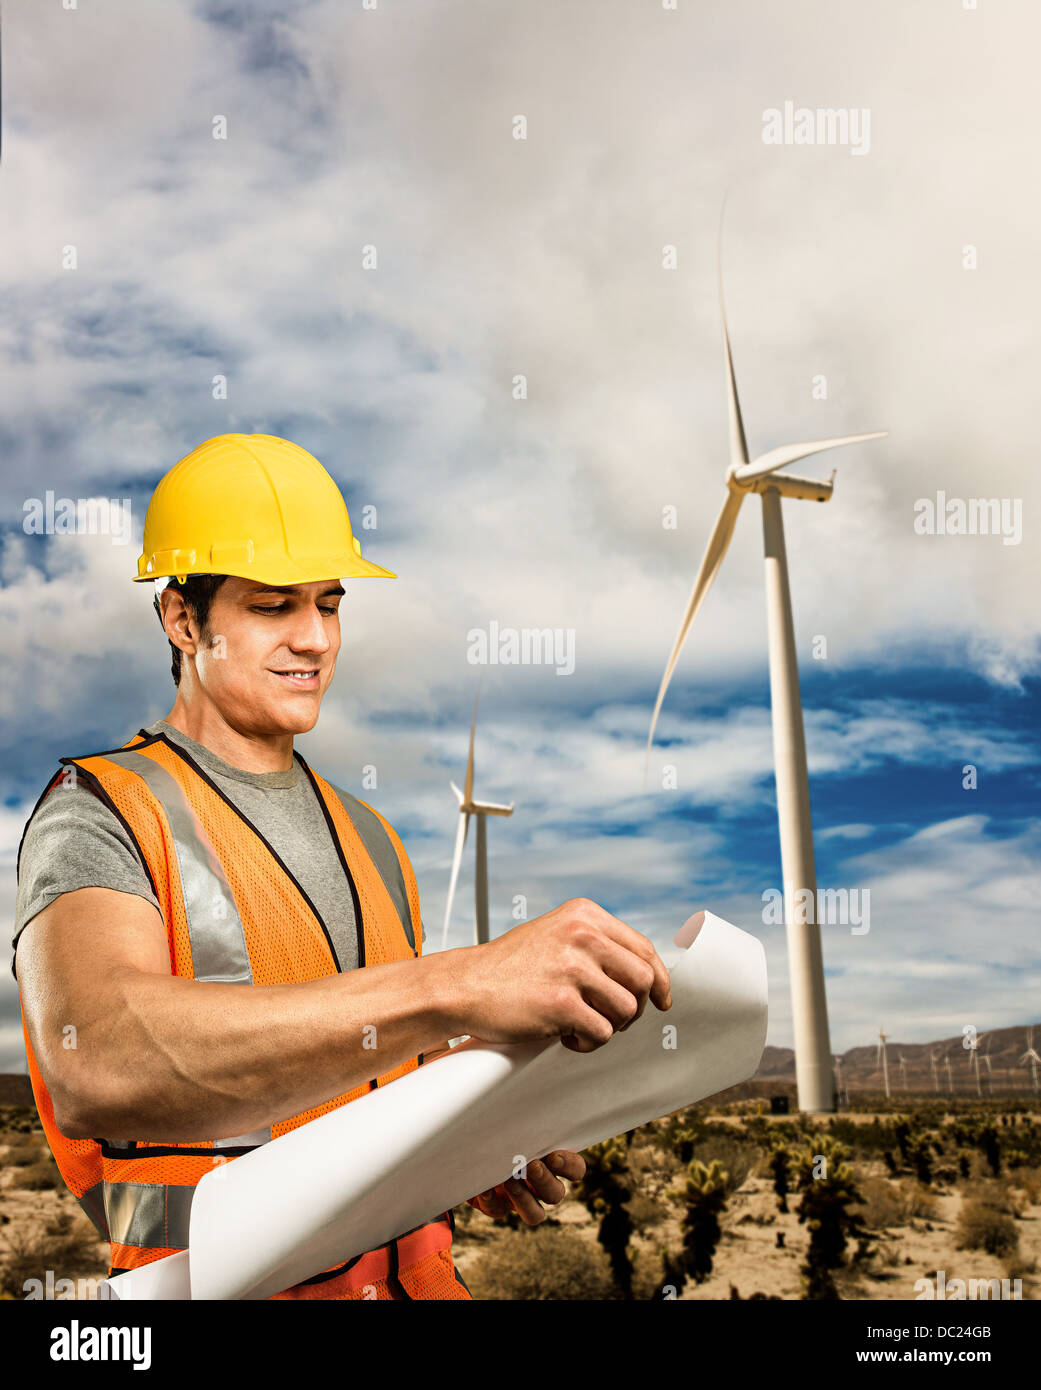 Man standing in front of wind farm Banque D'Images